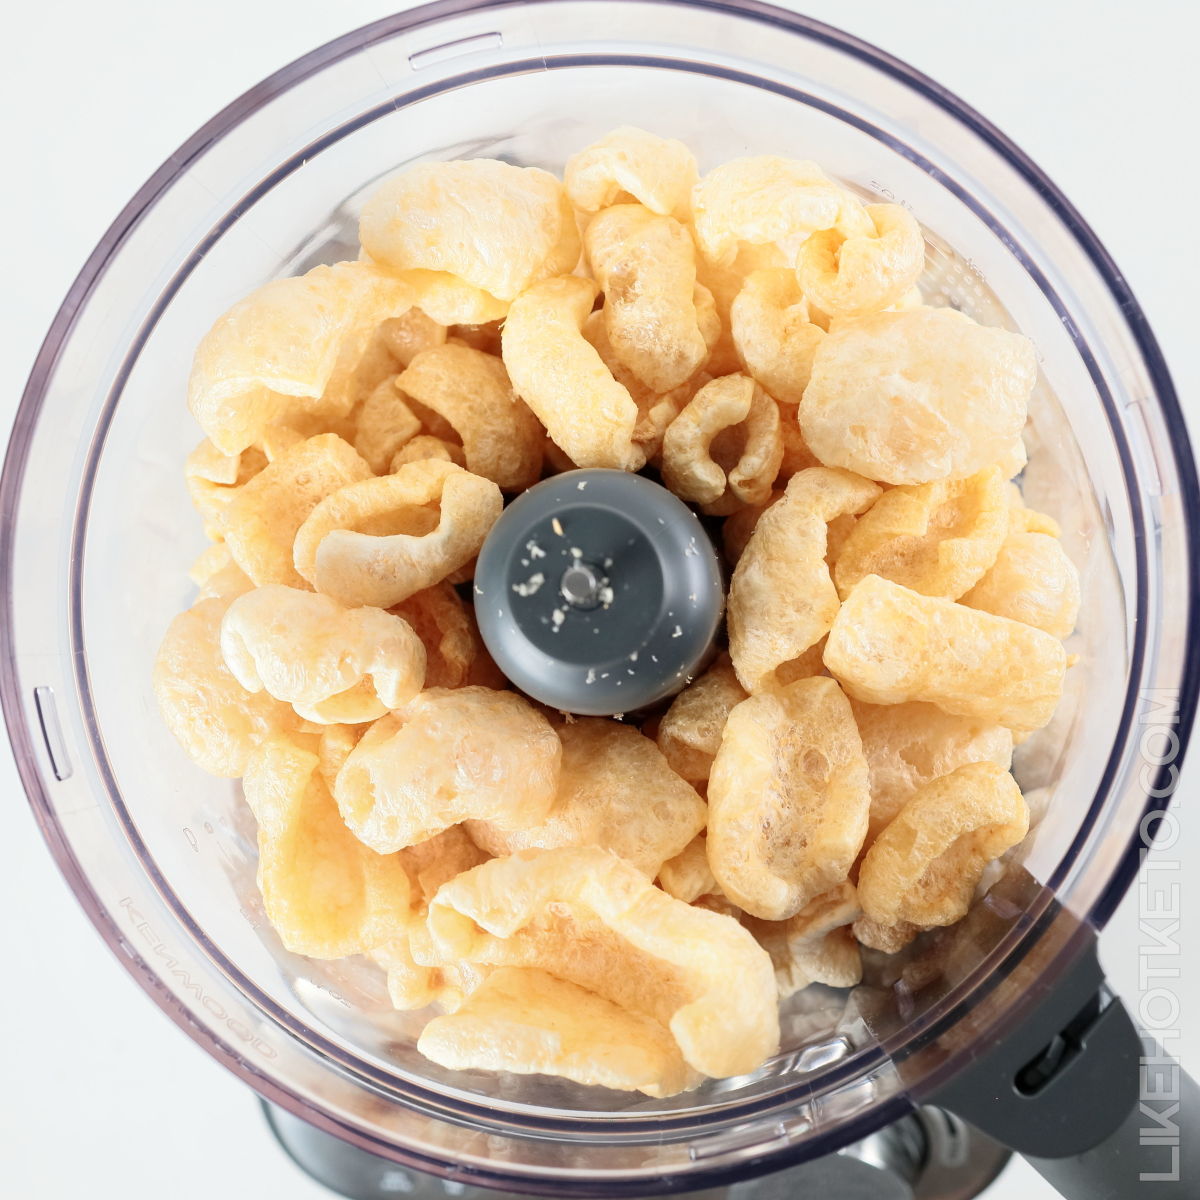 A food processor filled with pork rinds.